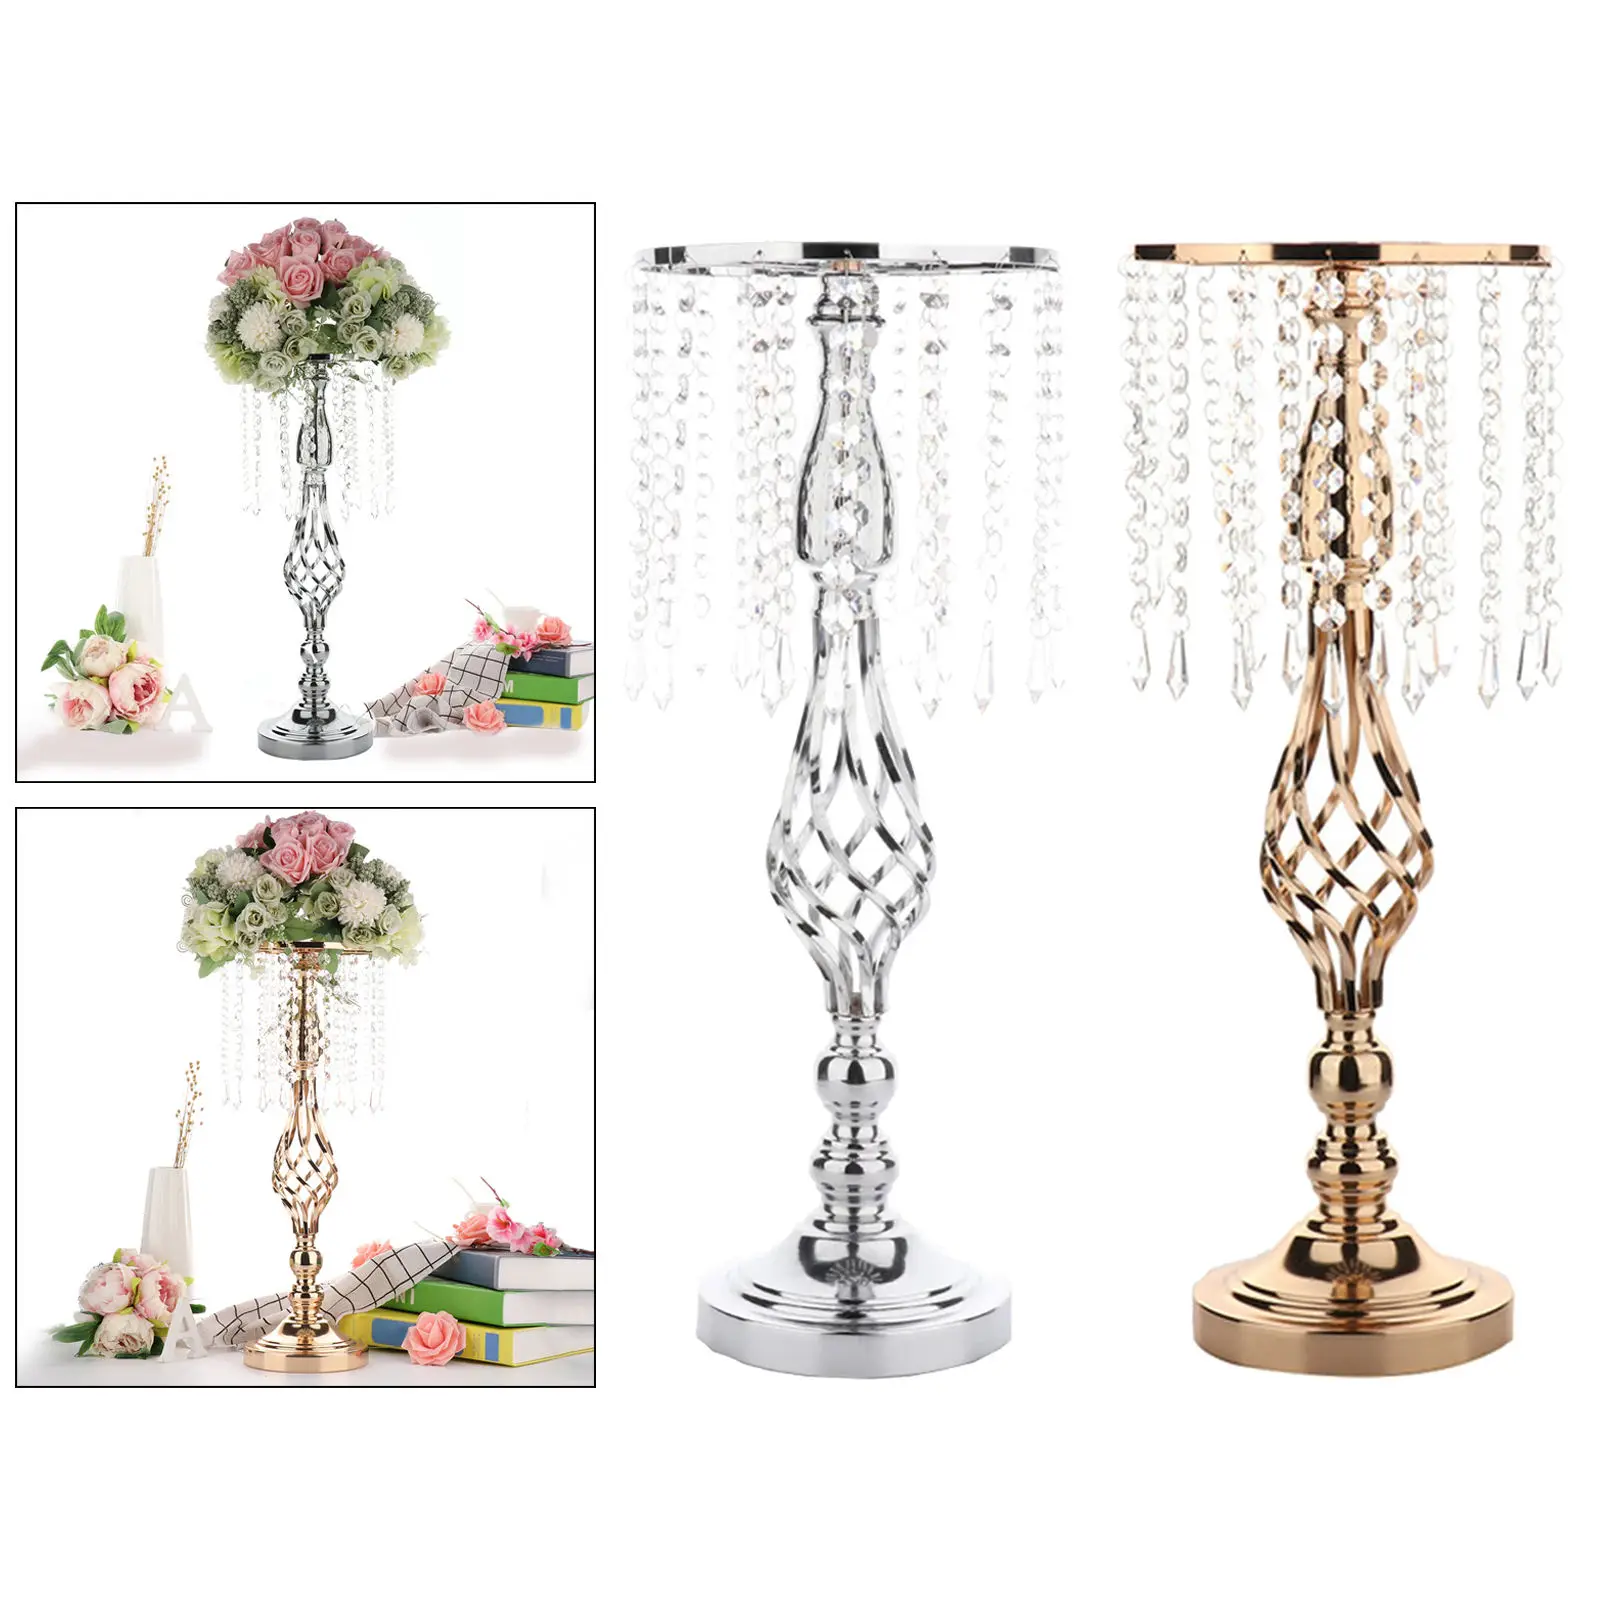 Crystals Candle Holders Iron Plating Candlestick Flower Vase Table Centerpiece Event Flower Vase Wedding Road Lead Decoration